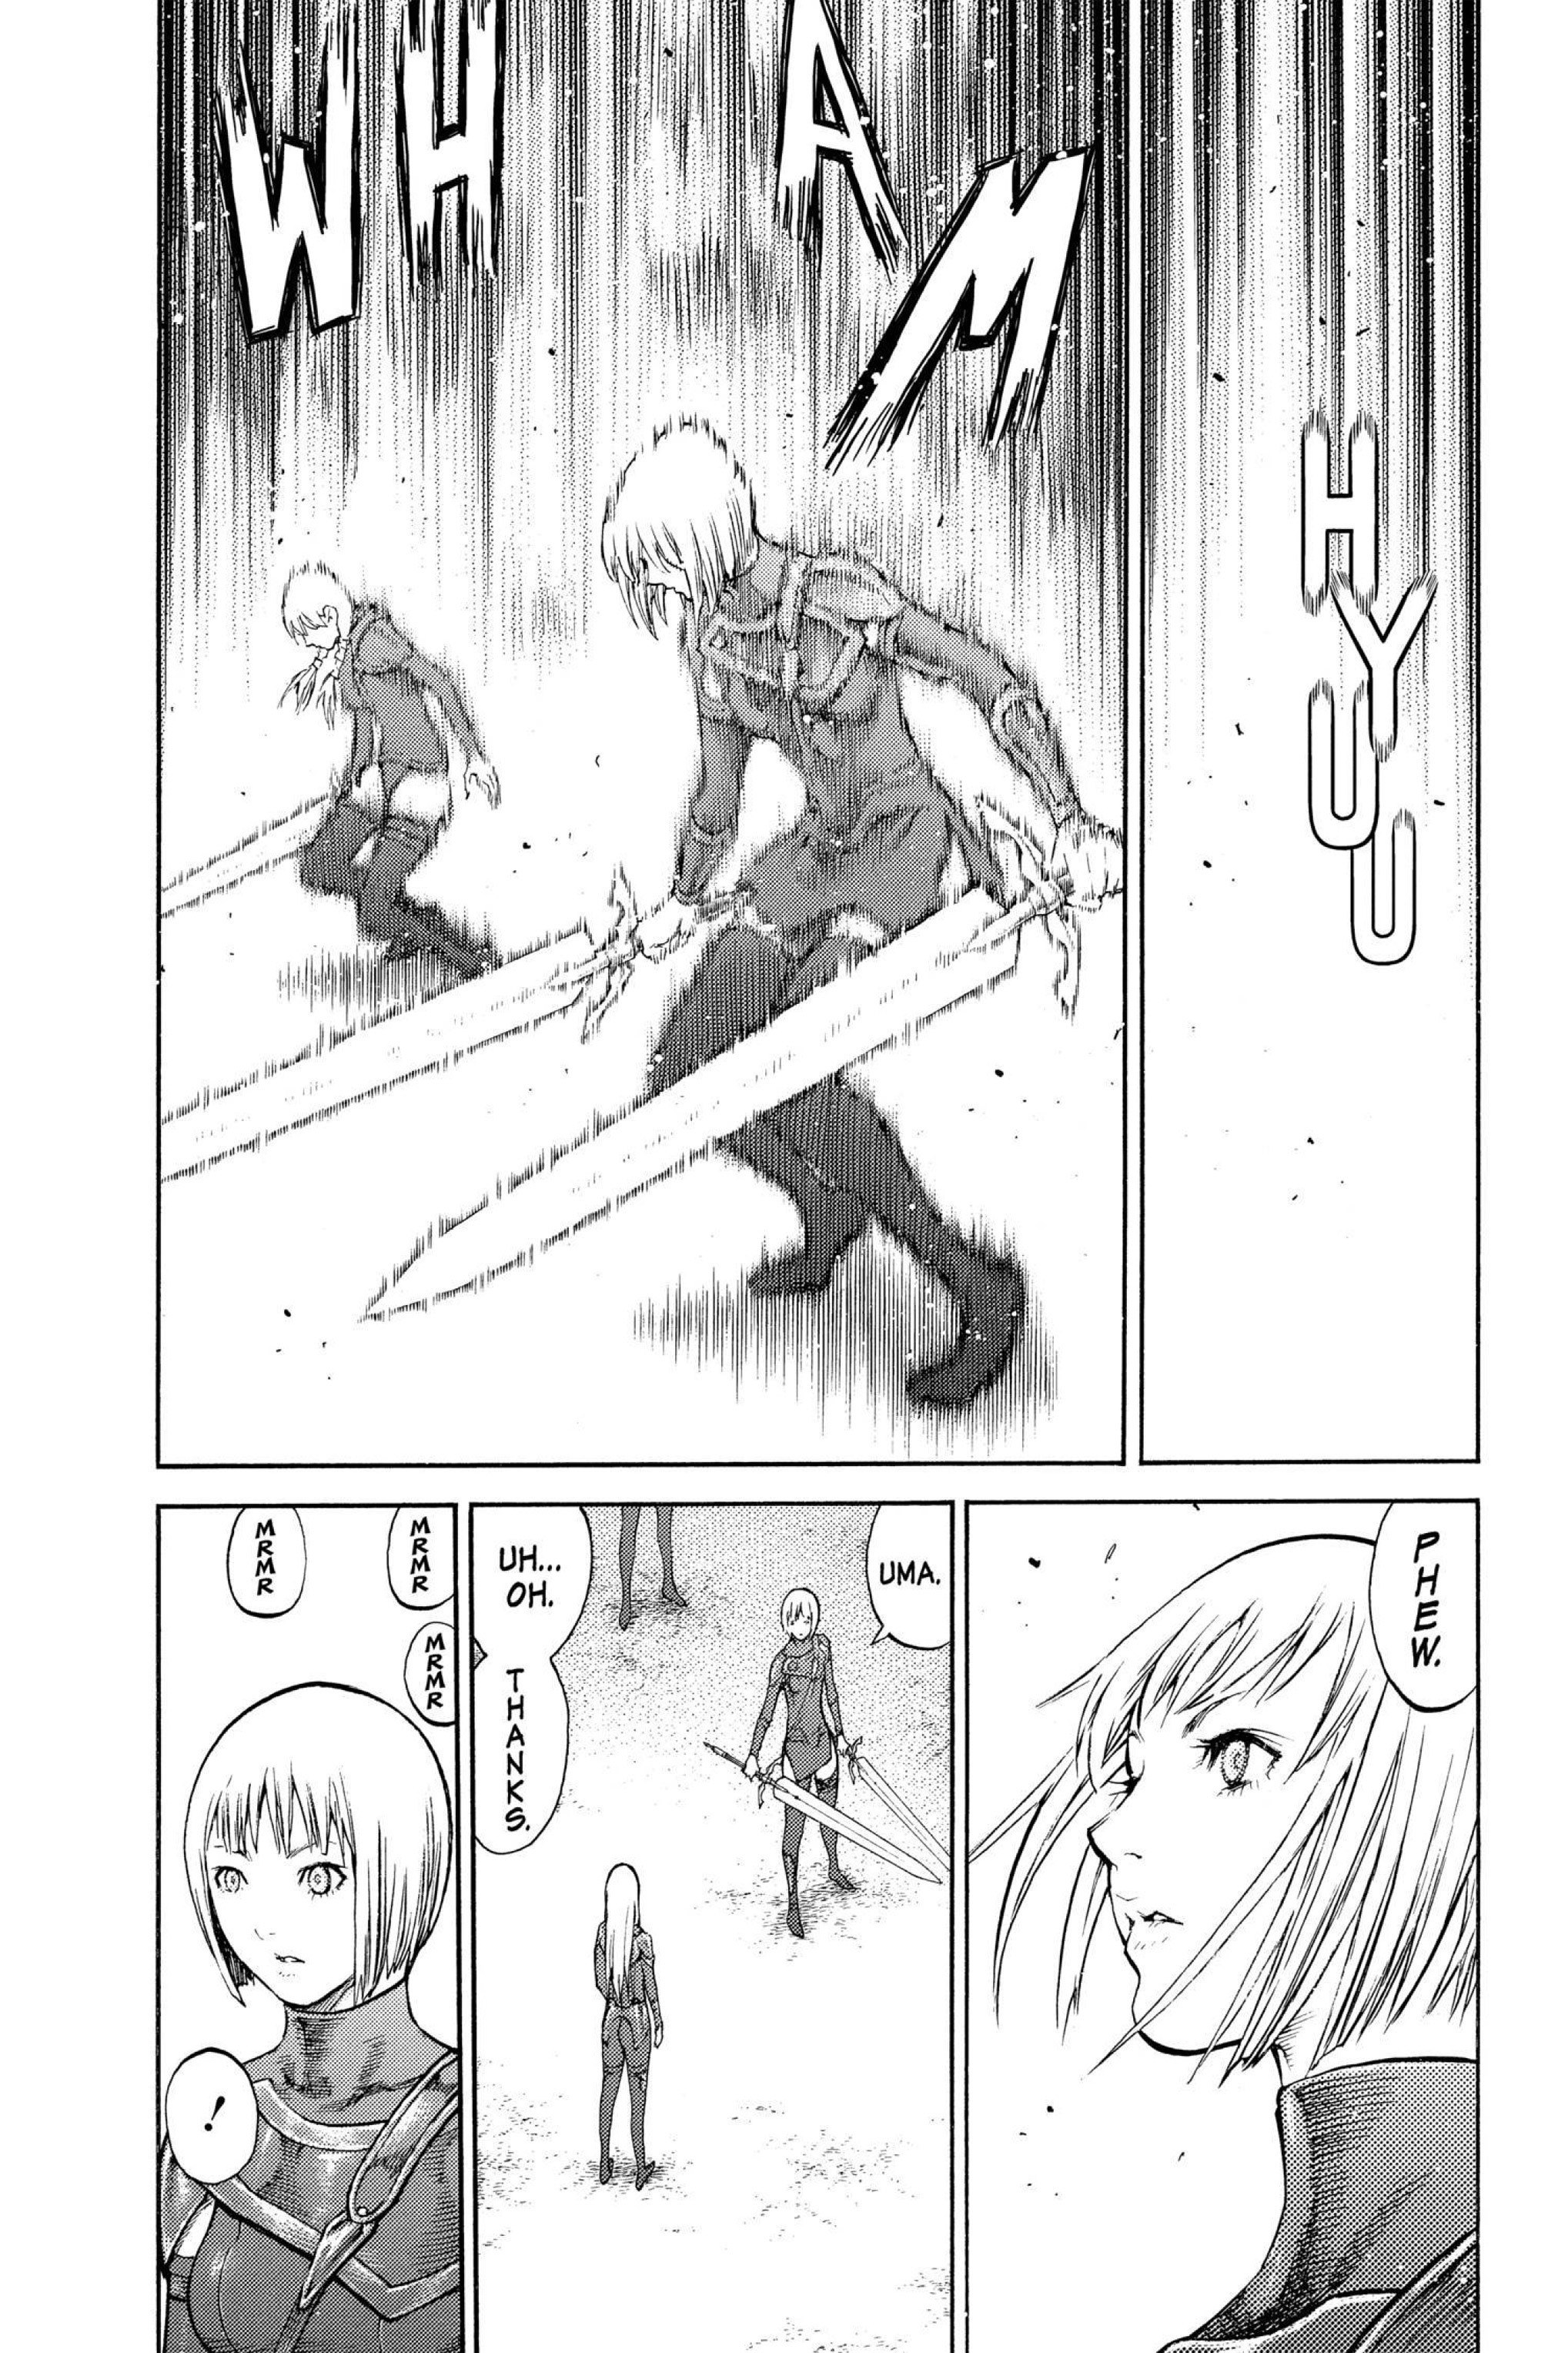 Read online Claymore comic -  Issue #15 - 175